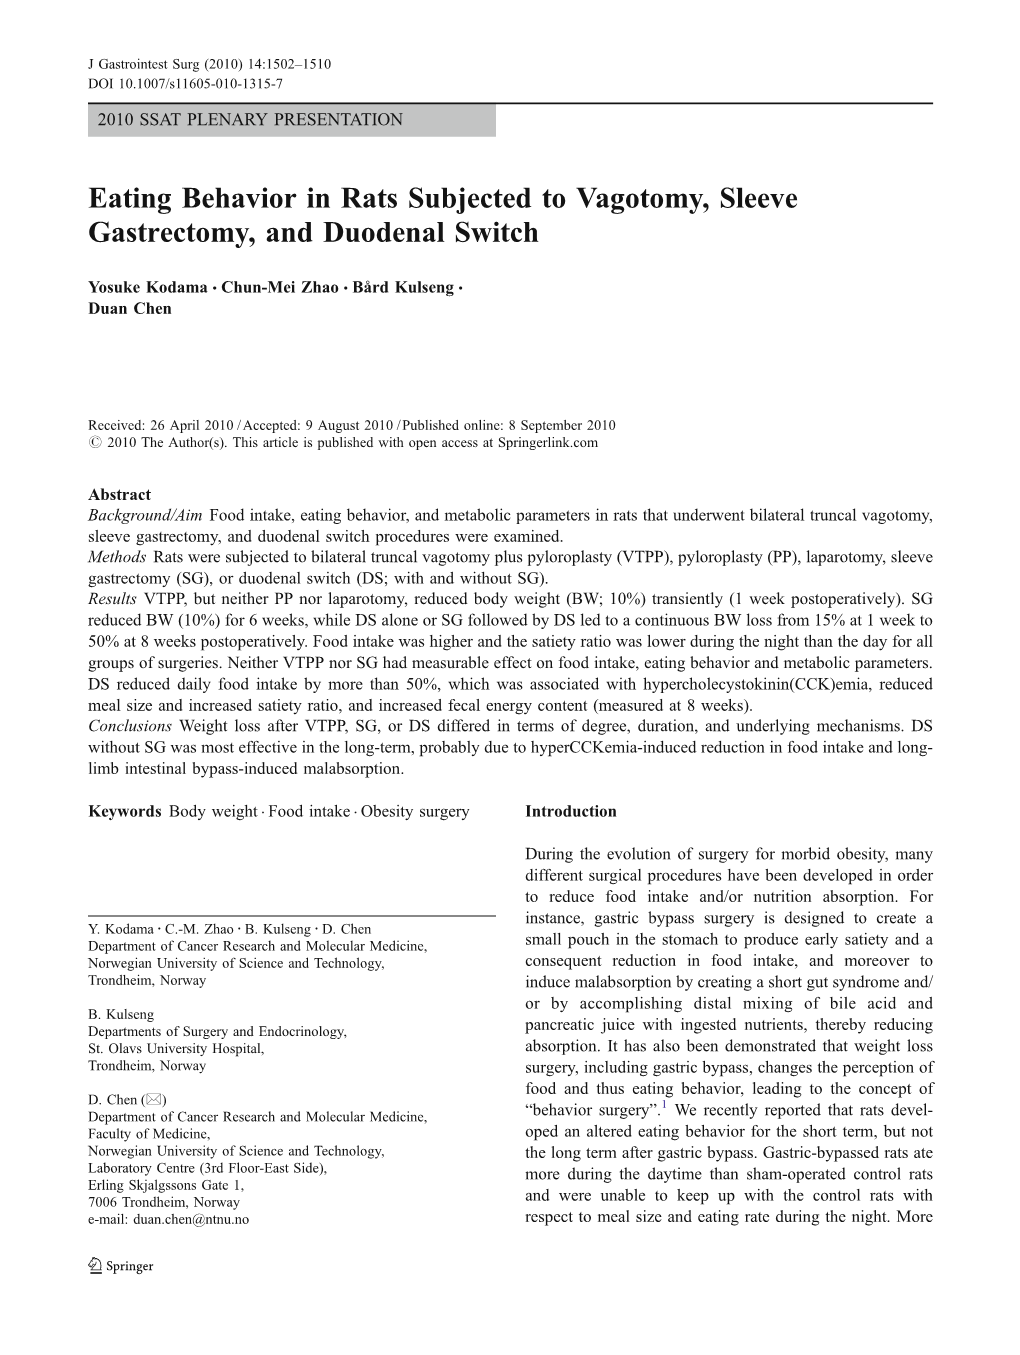 Eating Behavior in Rats Subjected to Vagotomy, Sleeve Gastrectomy, and Duodenal Switch